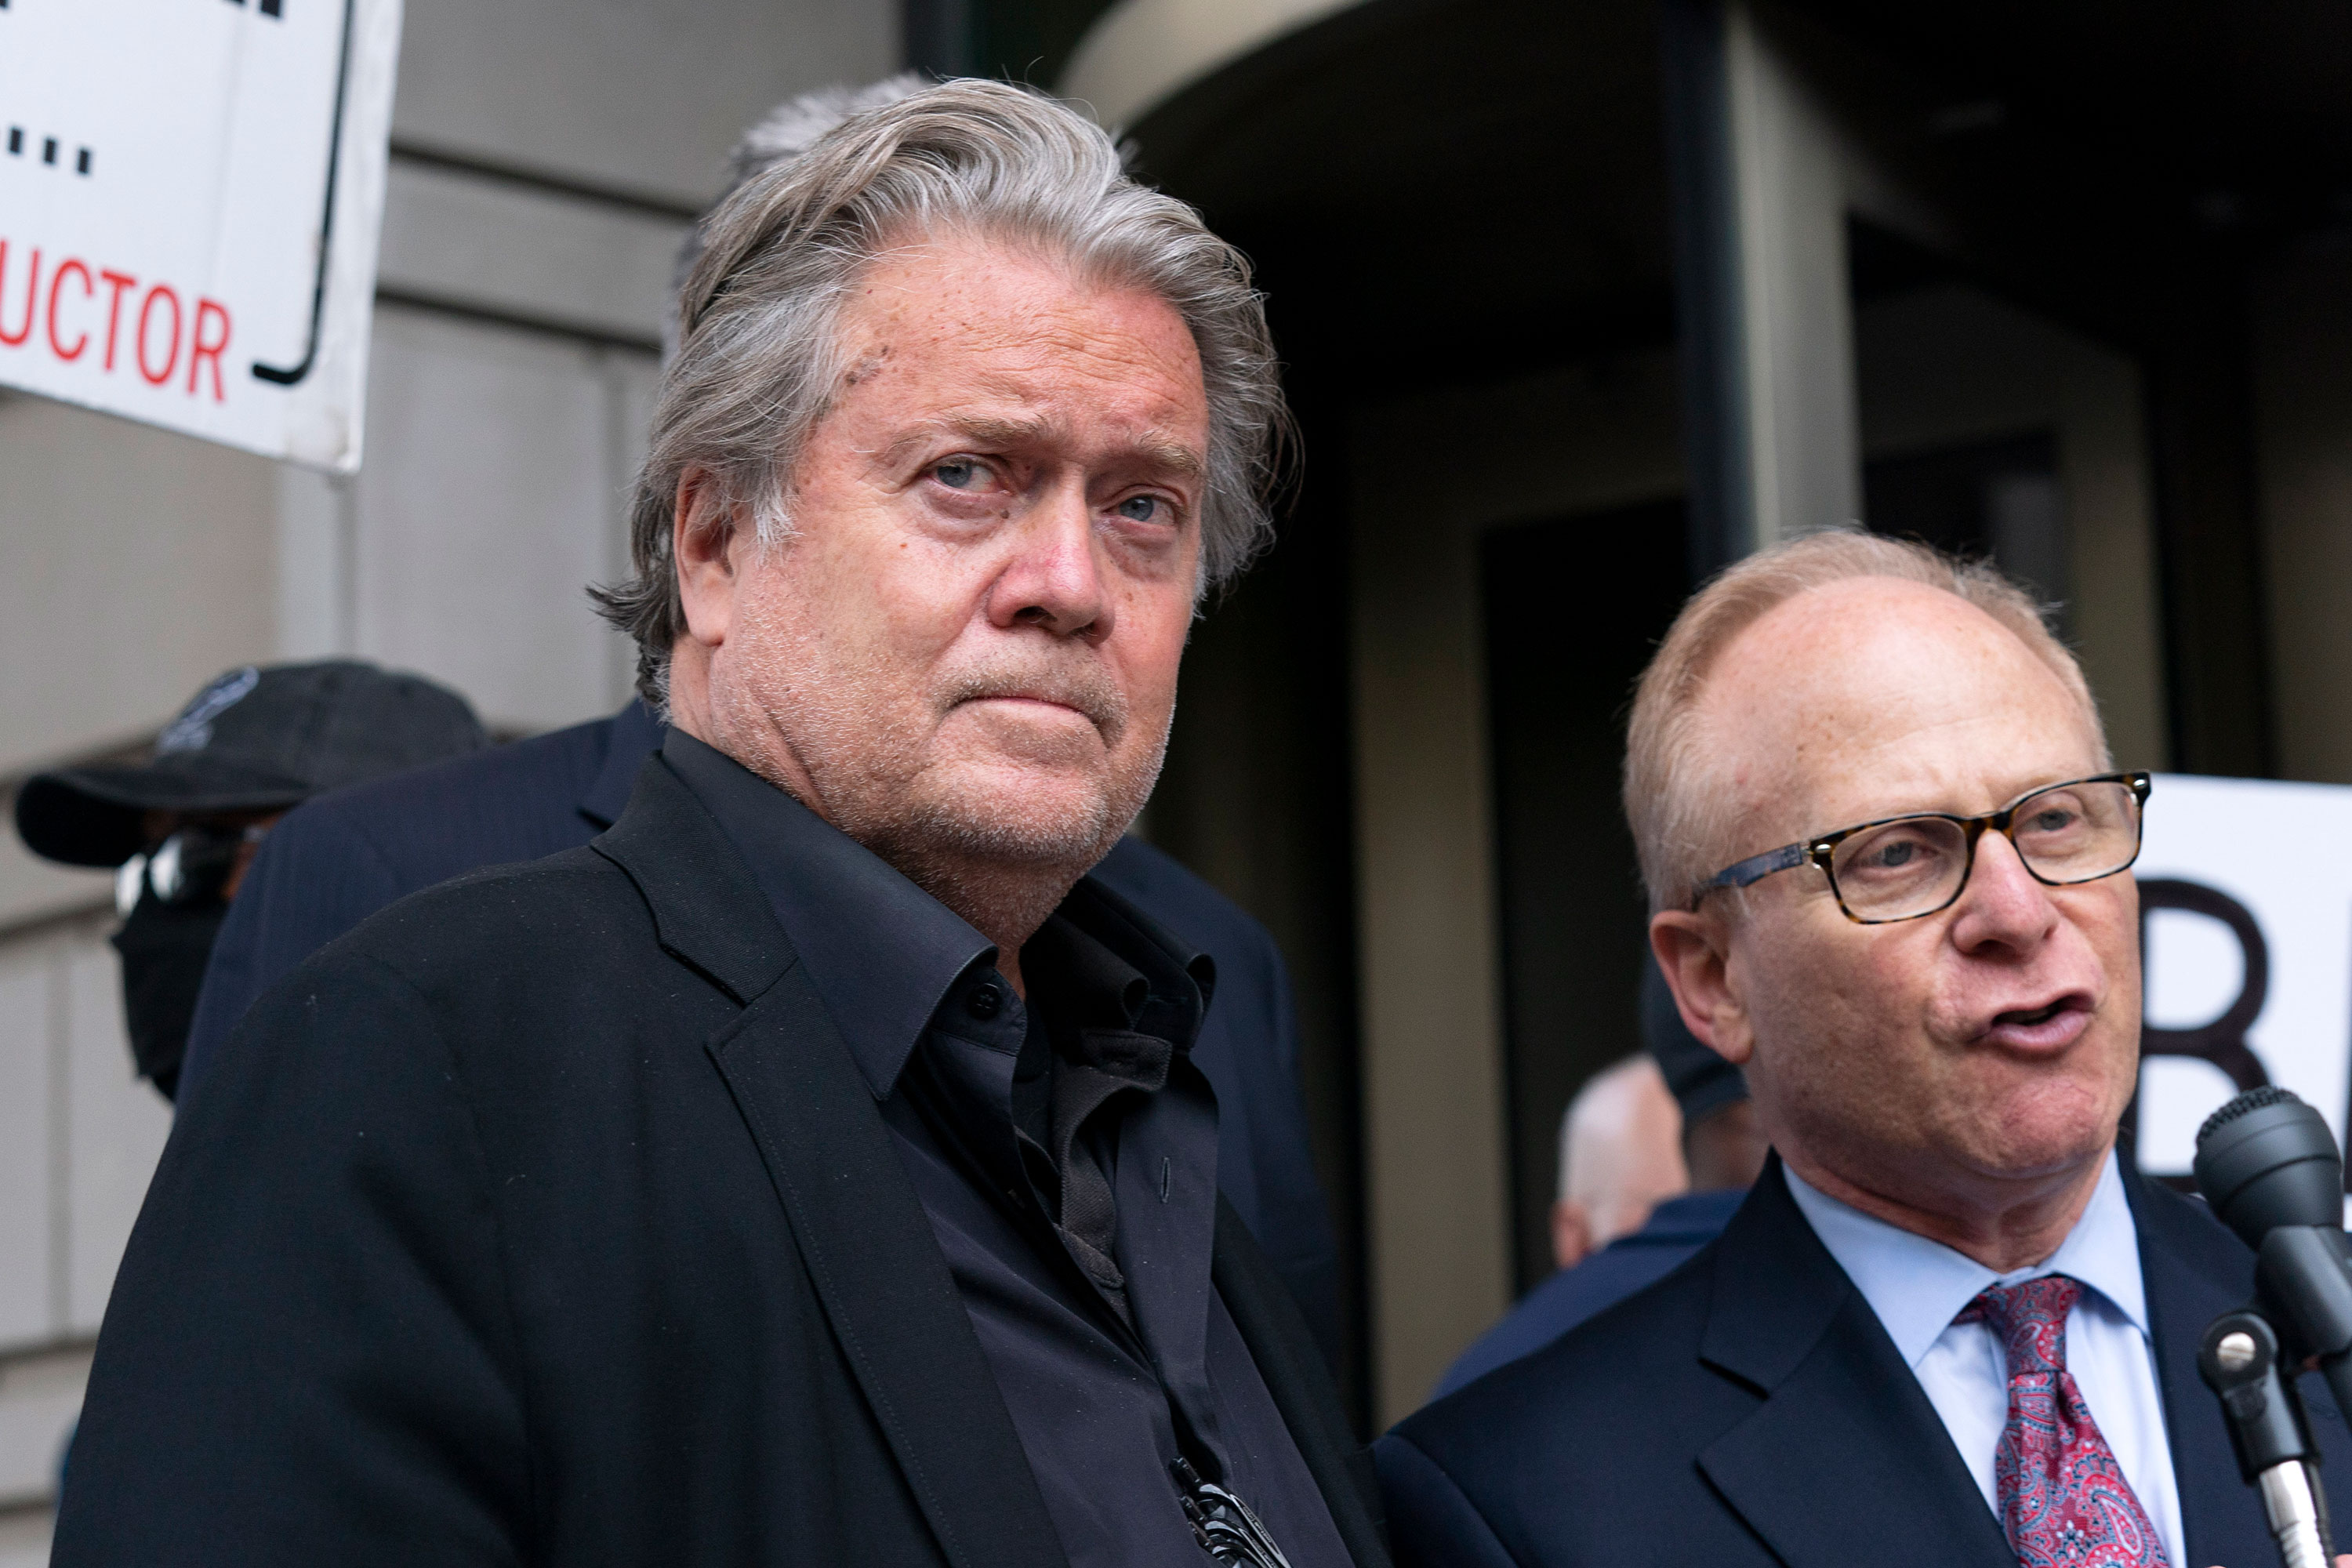 Steve Bannon stands next to his attorney David Schoen as he speaks to the media on Thursday.